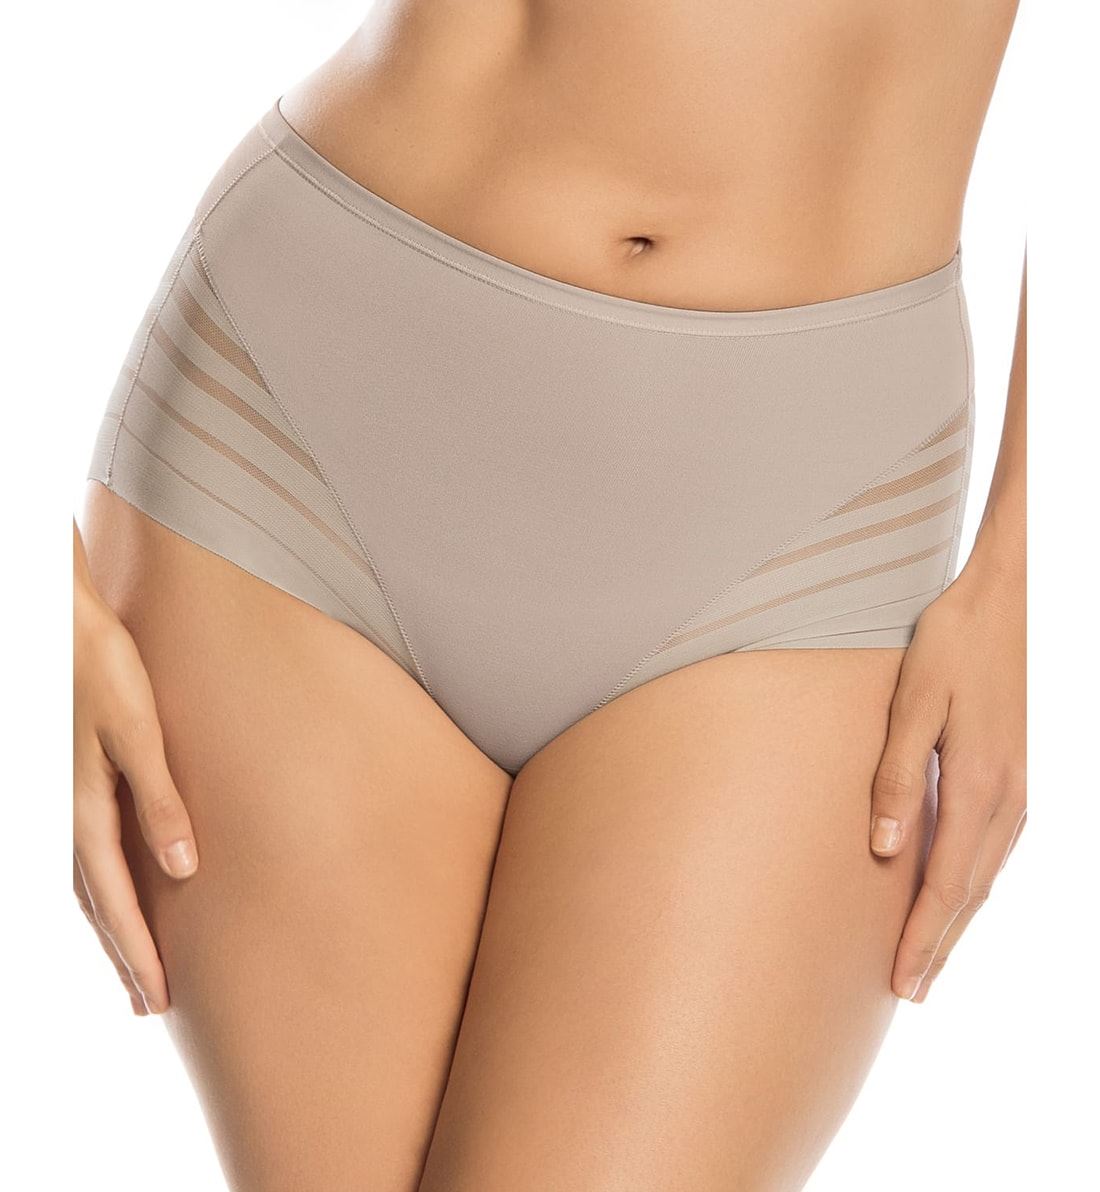 Leonisa Undetectable Comfy Compression Classic Panty (012903),Small,Light Beige - Light Beige,Small